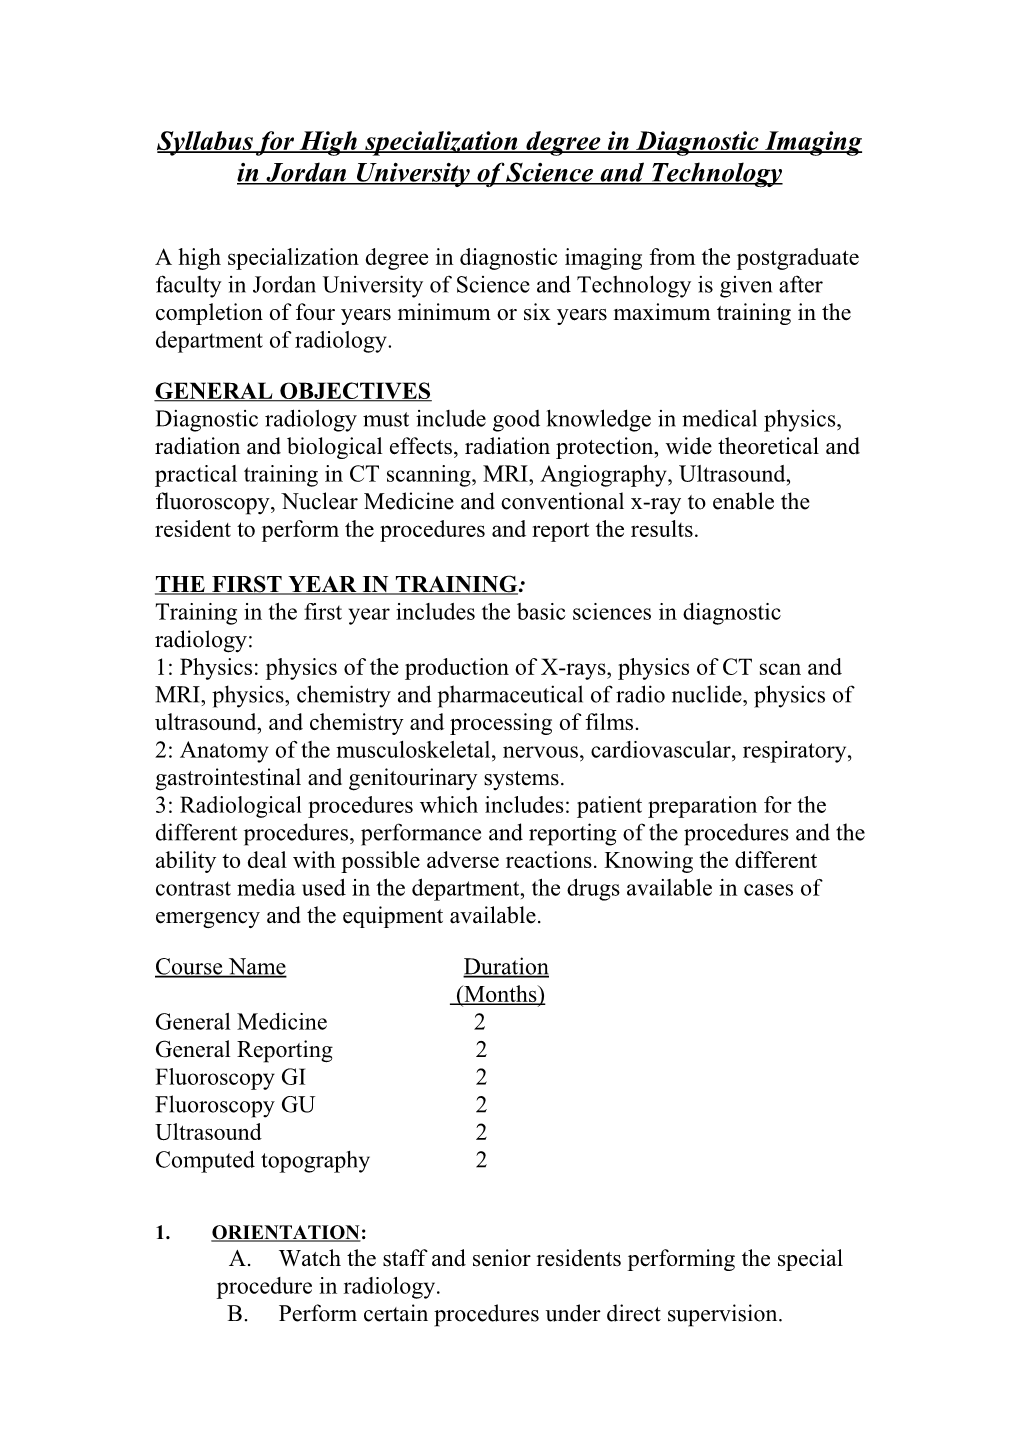 Syllabus for High Specialization Degree in Diagnostic Imaging in Jordan University For